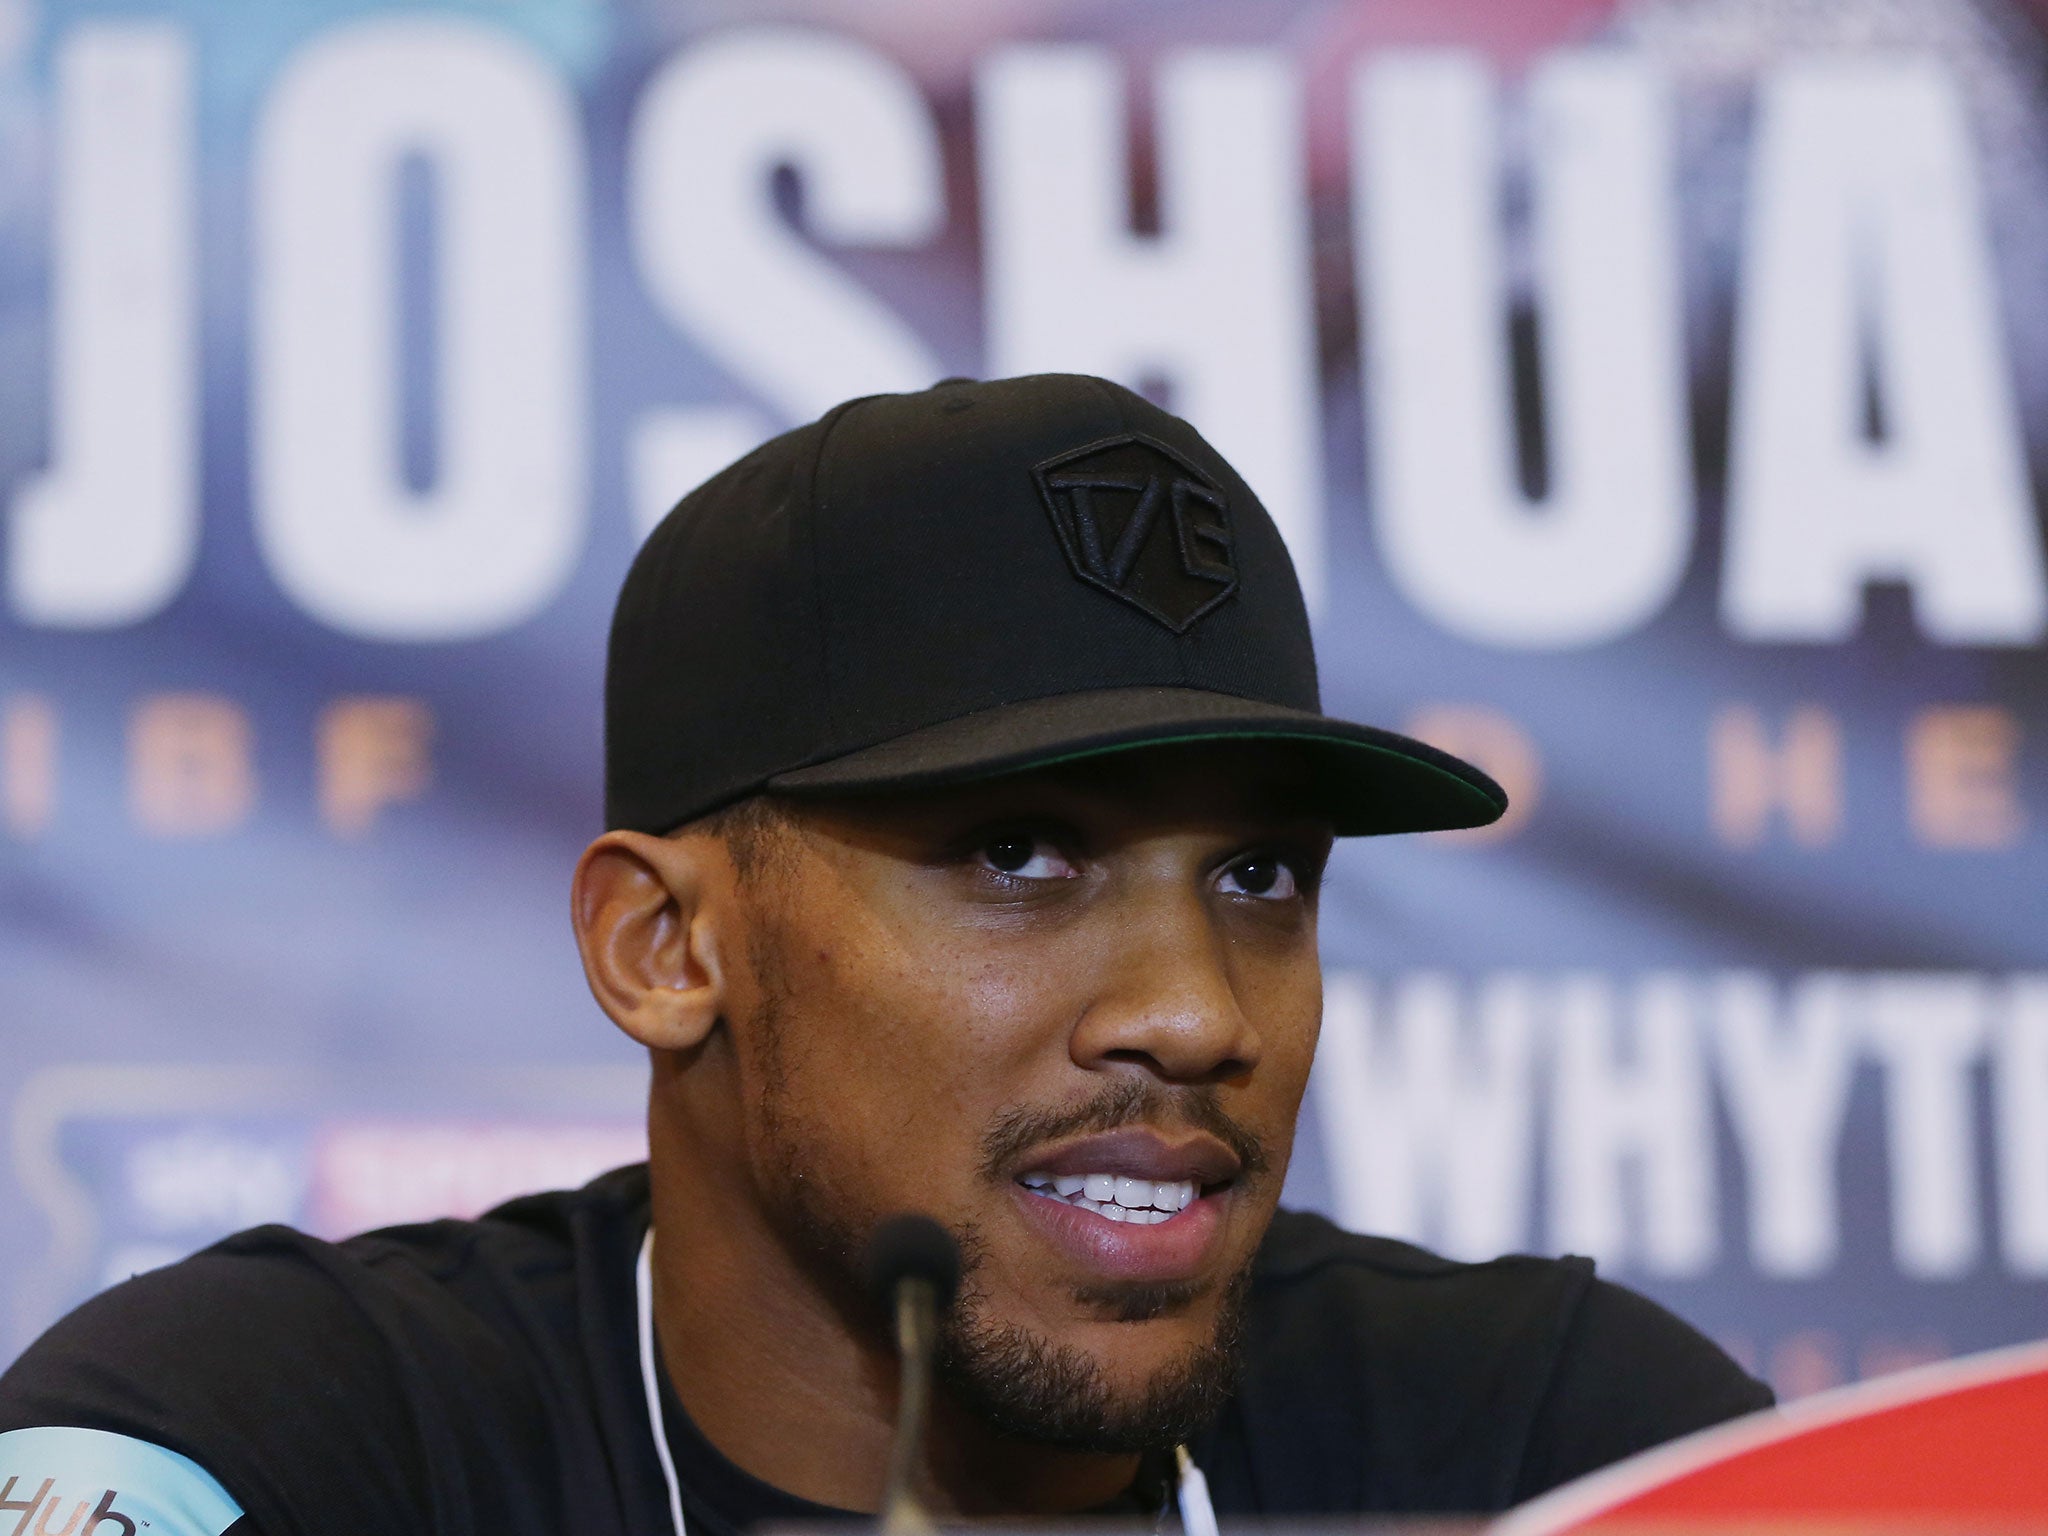 Joshua goes toe-to-toe with Eric Molina in Manchester on Saturday night